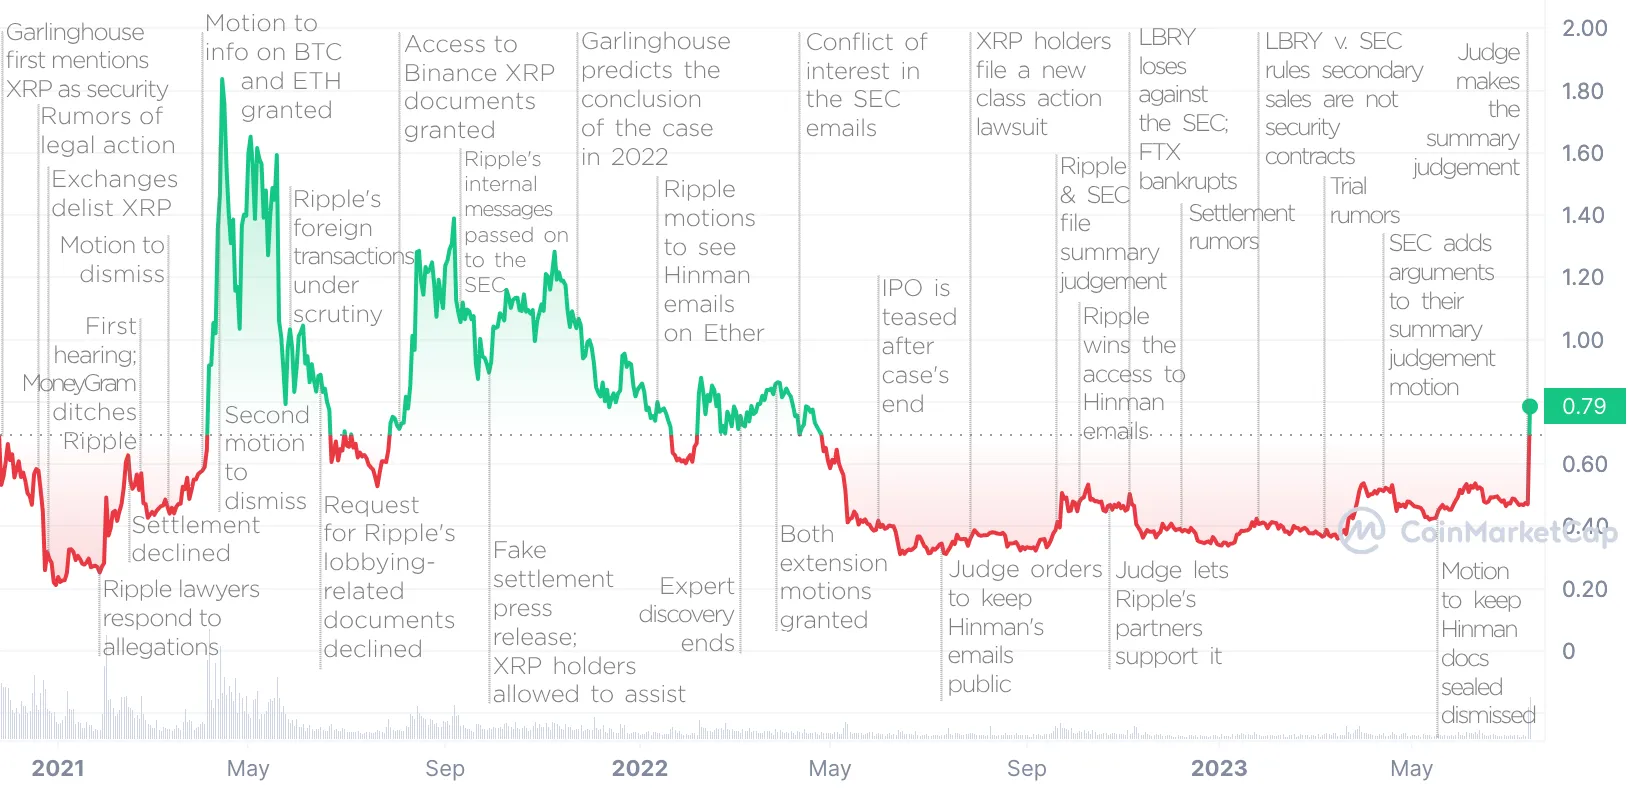 sec vs. ripple case timeline overimposed on the xrp price chart